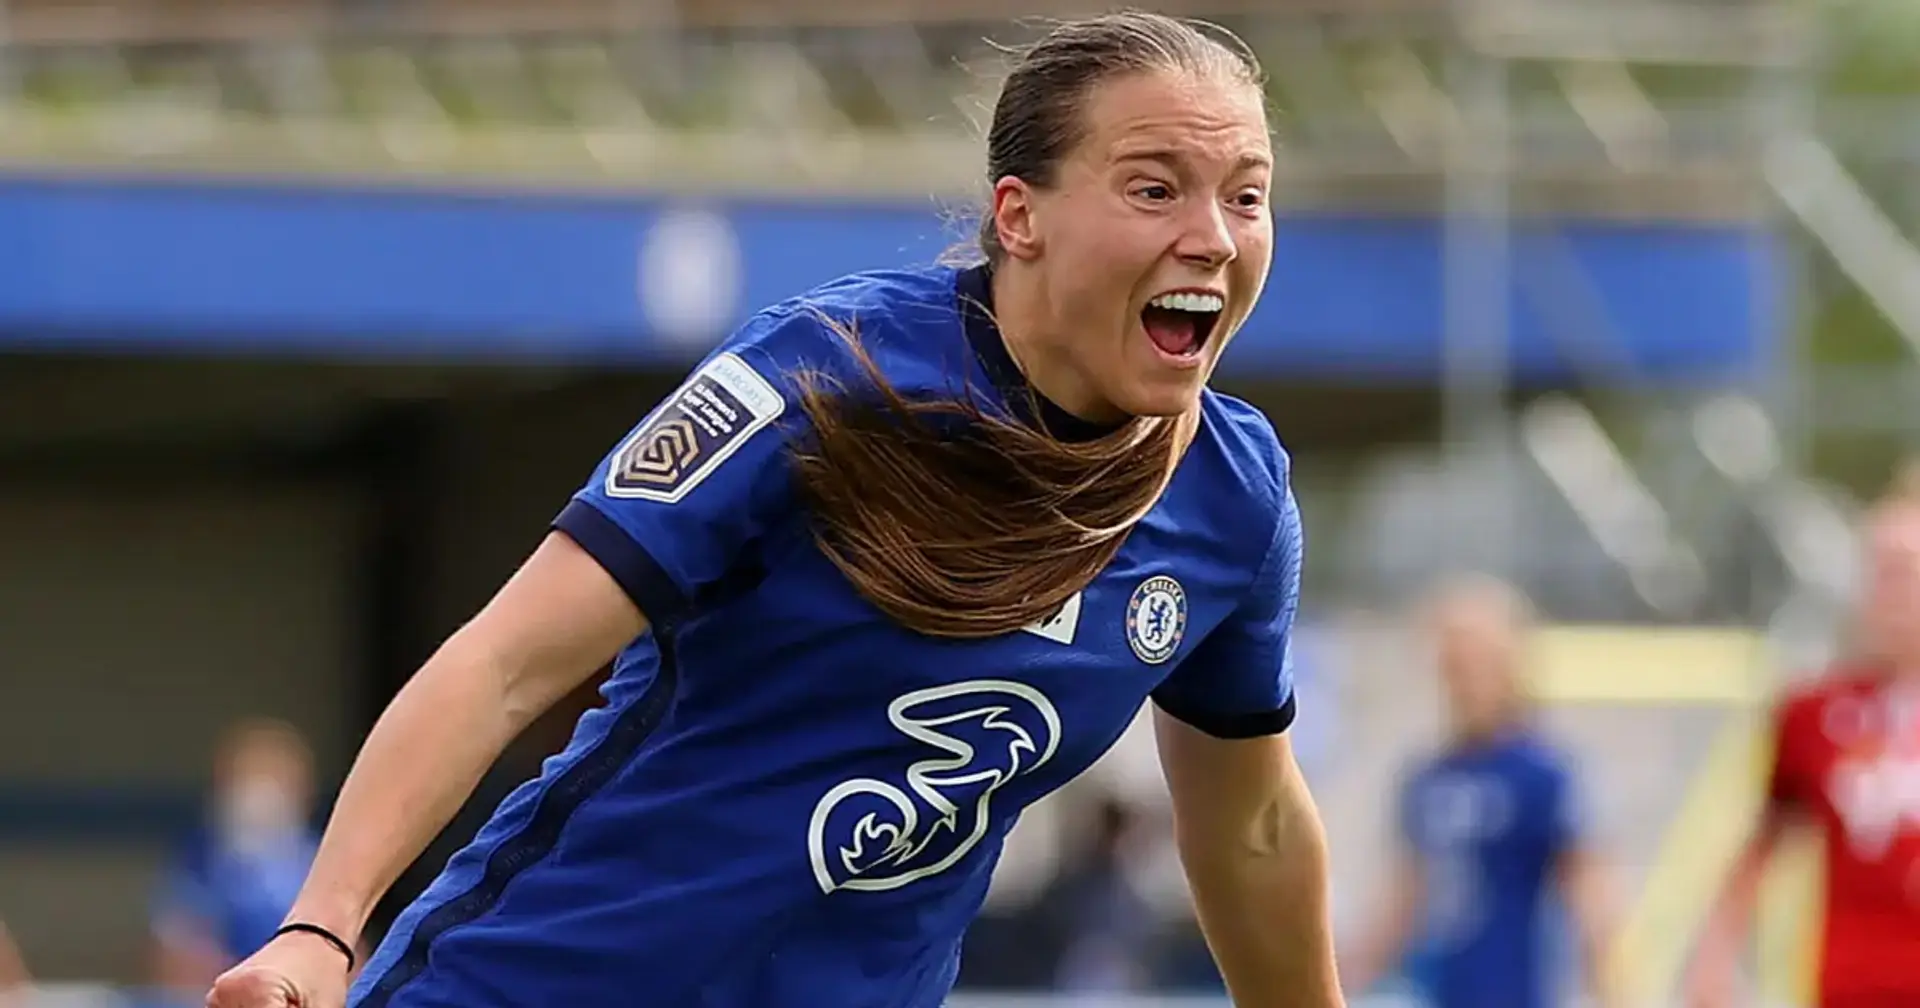 Chelsea Women’s star Fran Kirby wins FWA Player of the Year